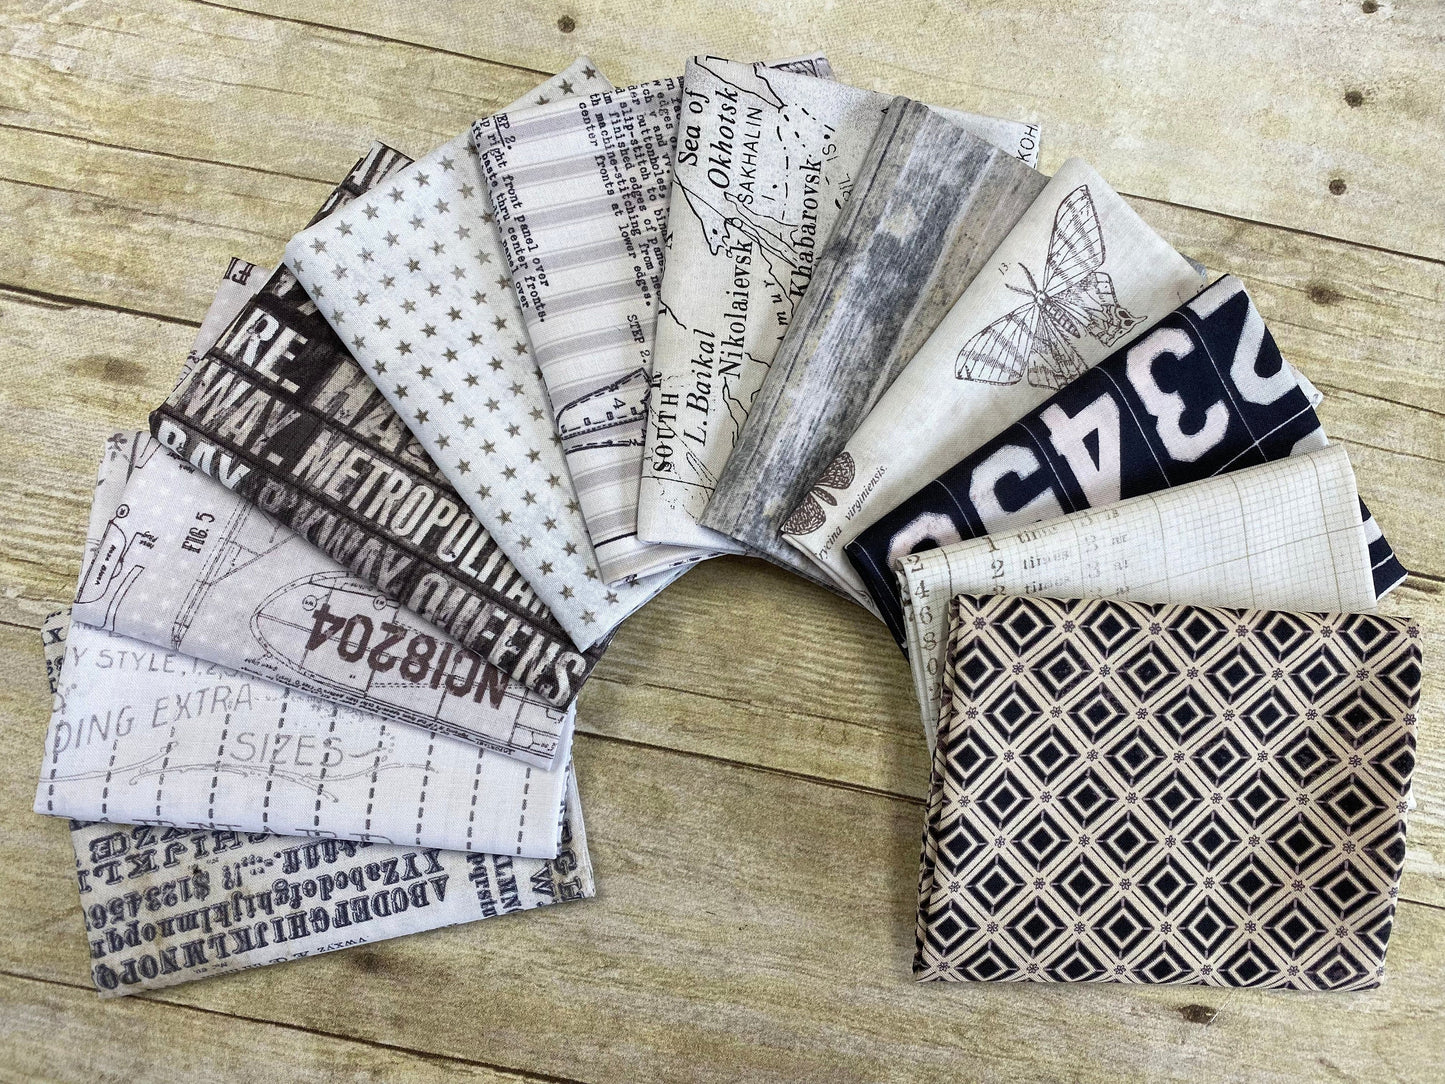 Monochrome by Tim Holtz Subway Signs Charcoal PWTH173.CHARCOAL Cotton Woven Fabric